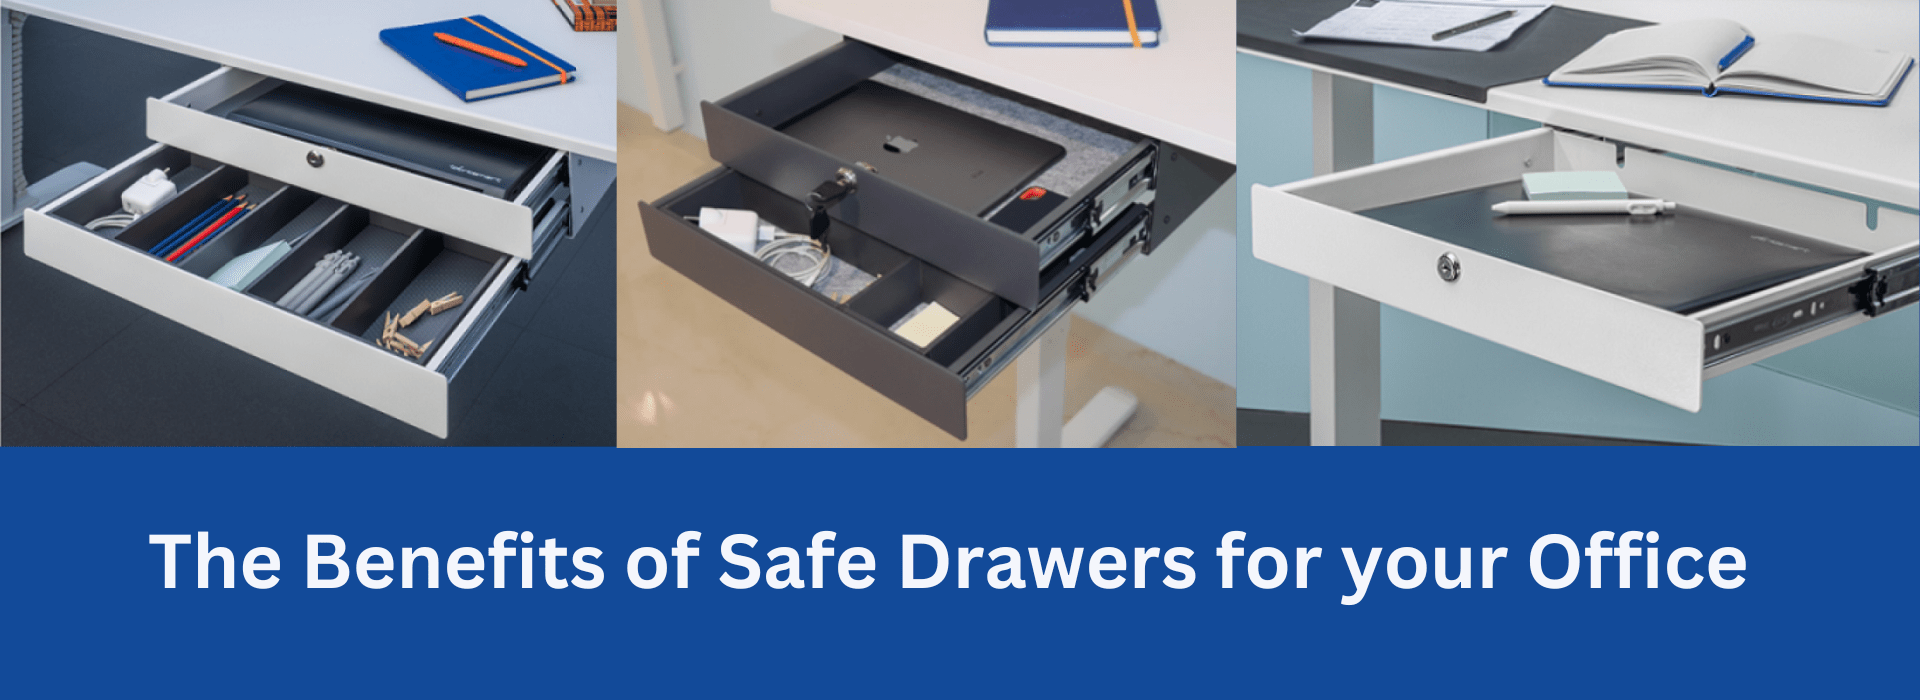 The Benefits Of Safe Drawers For Your Office SIA